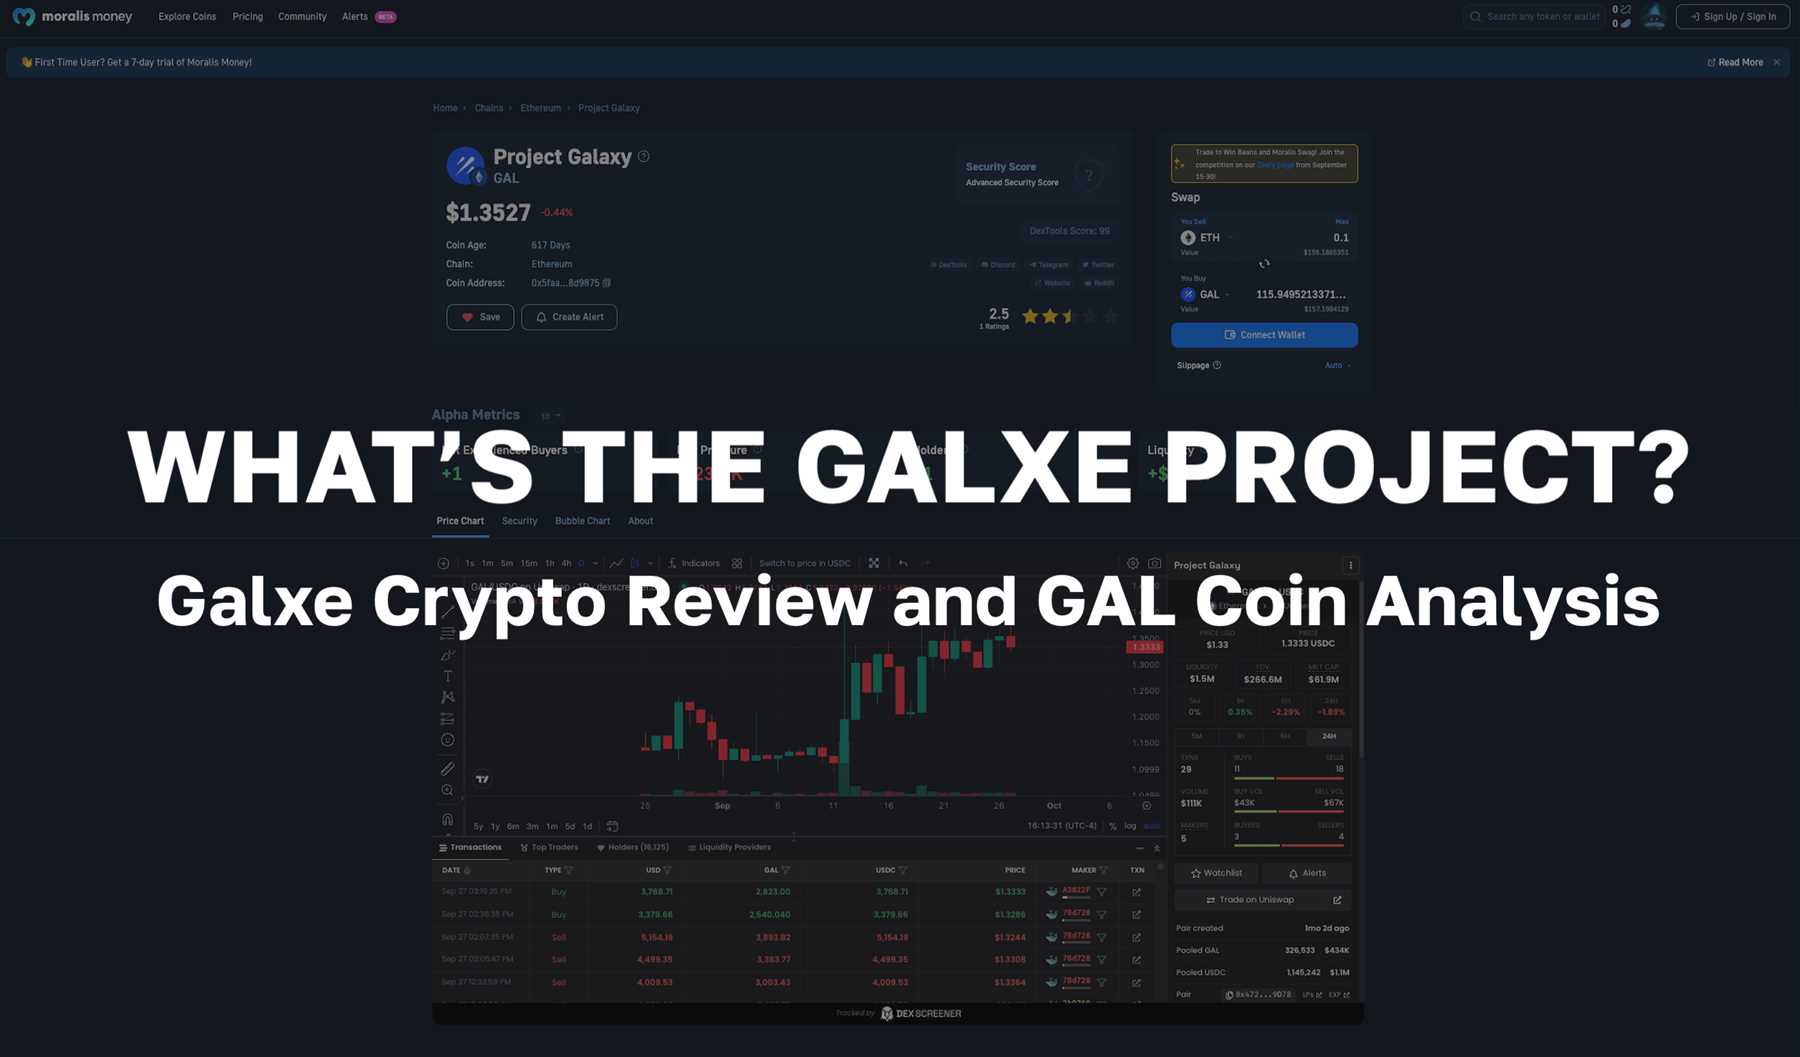 Overview of Galxe